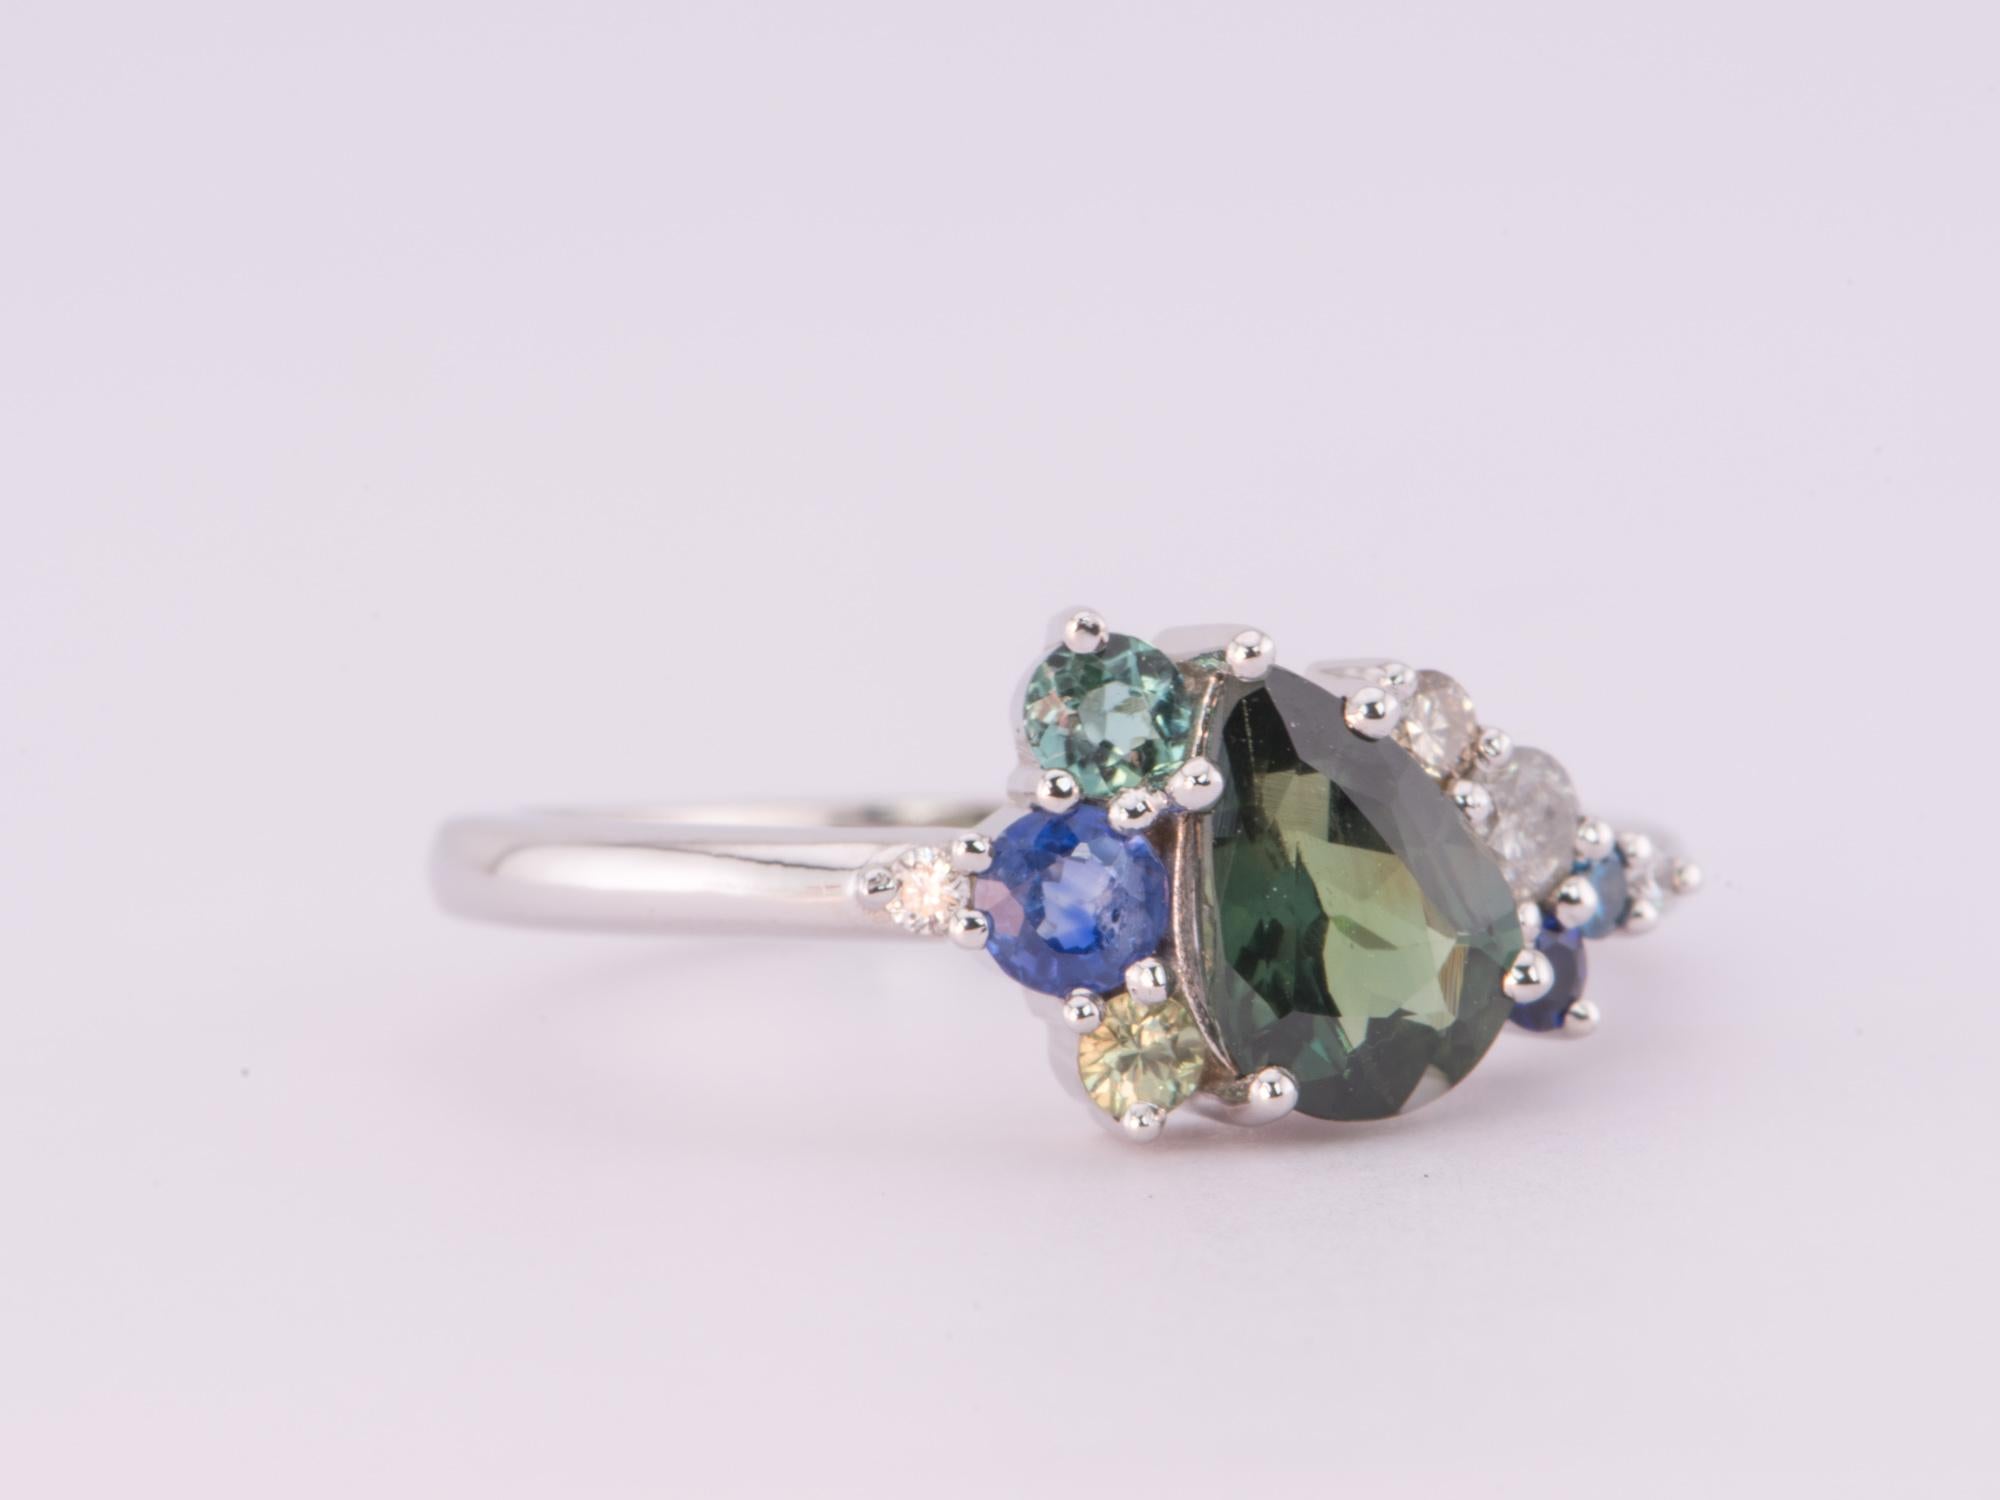 ♥ Solid 14k gold ring set with a beautiful pear-shaped Nigerian sapphire in the center, flanked by a cluster of white, gray, champagne, and blue diamonds, and a few blue green sapphires
♥ Gorgeous blue green color!

♥ US Size 7 (Free resizing up or